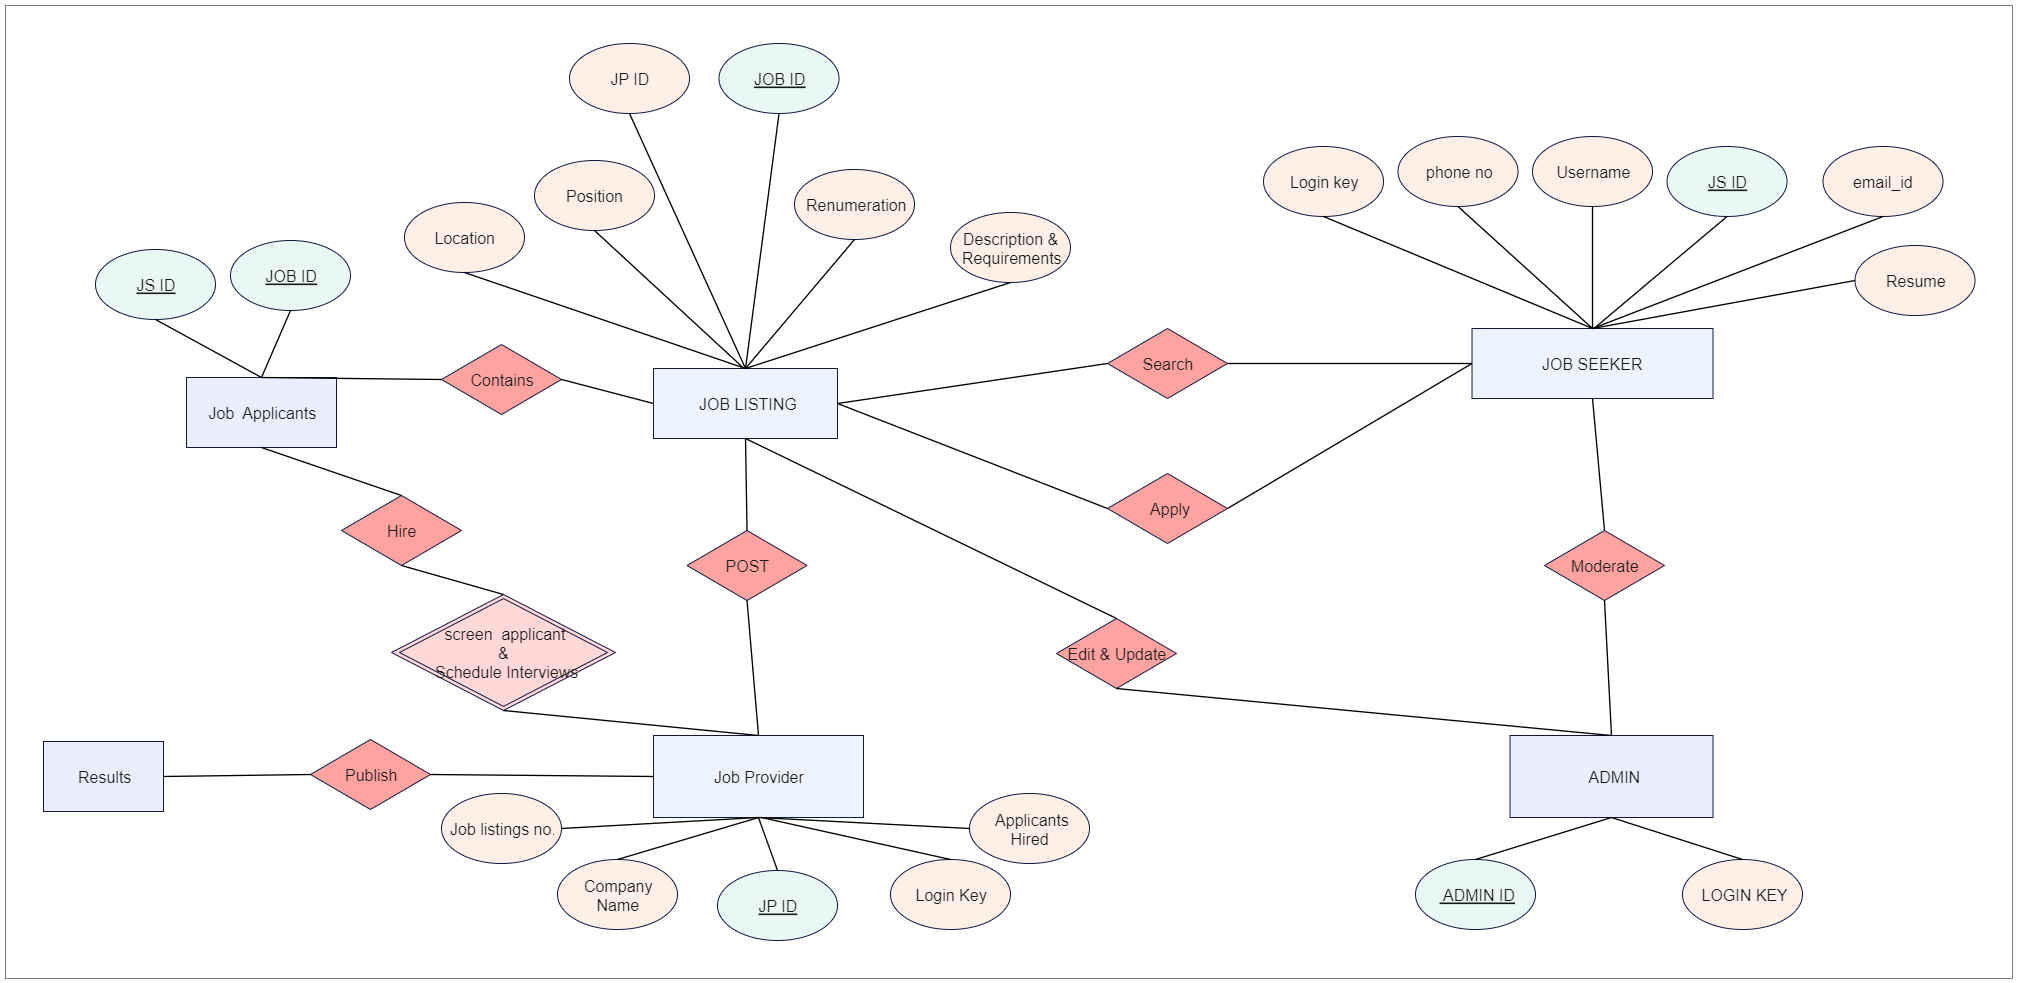 The following ER diagram is for a job search application system. The goal of this ER diagram is to develop a solid project using a database and Java. Some connections may be seen between the entity and its characteristics, such as the entity mobile app an